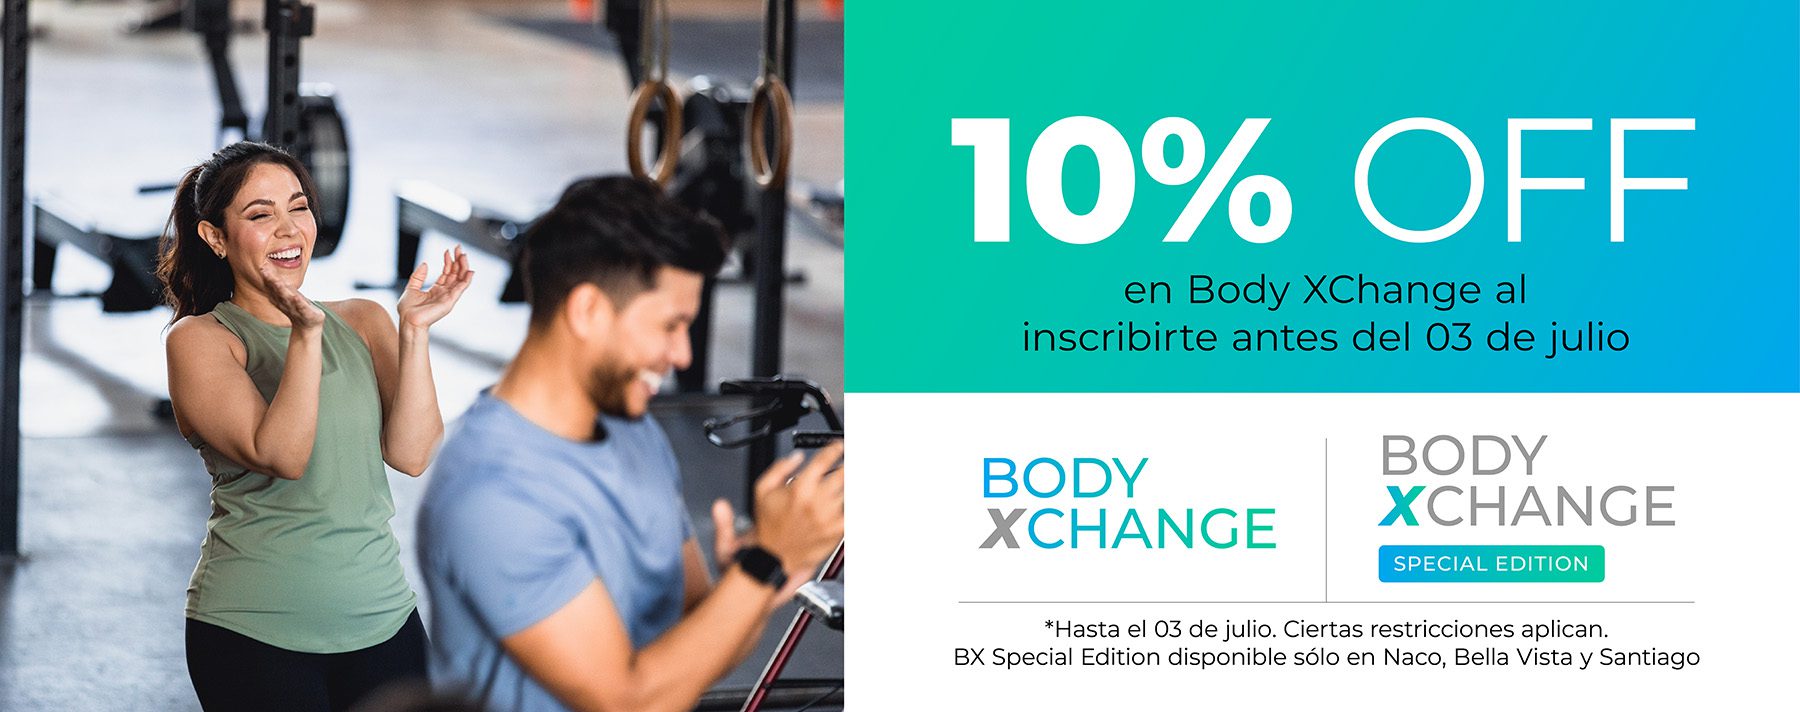 Body Xchange 10% Off Special Edition